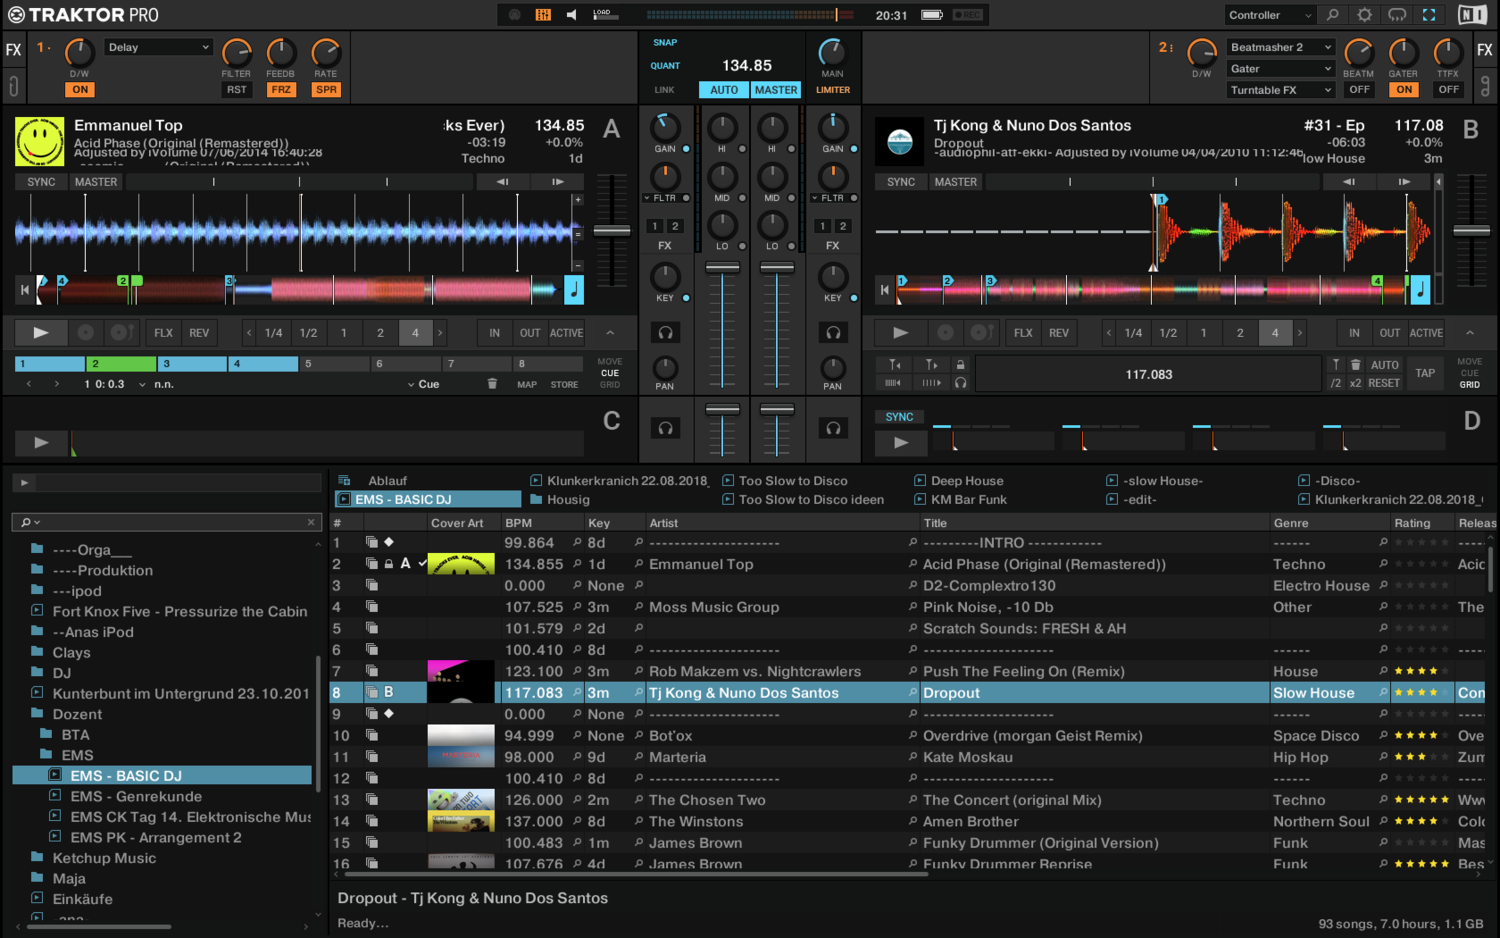 FIXING TRAKTOR PRO 3 AUDIO CRACKLING & DROP OUT ISSUES — Electric Cafe